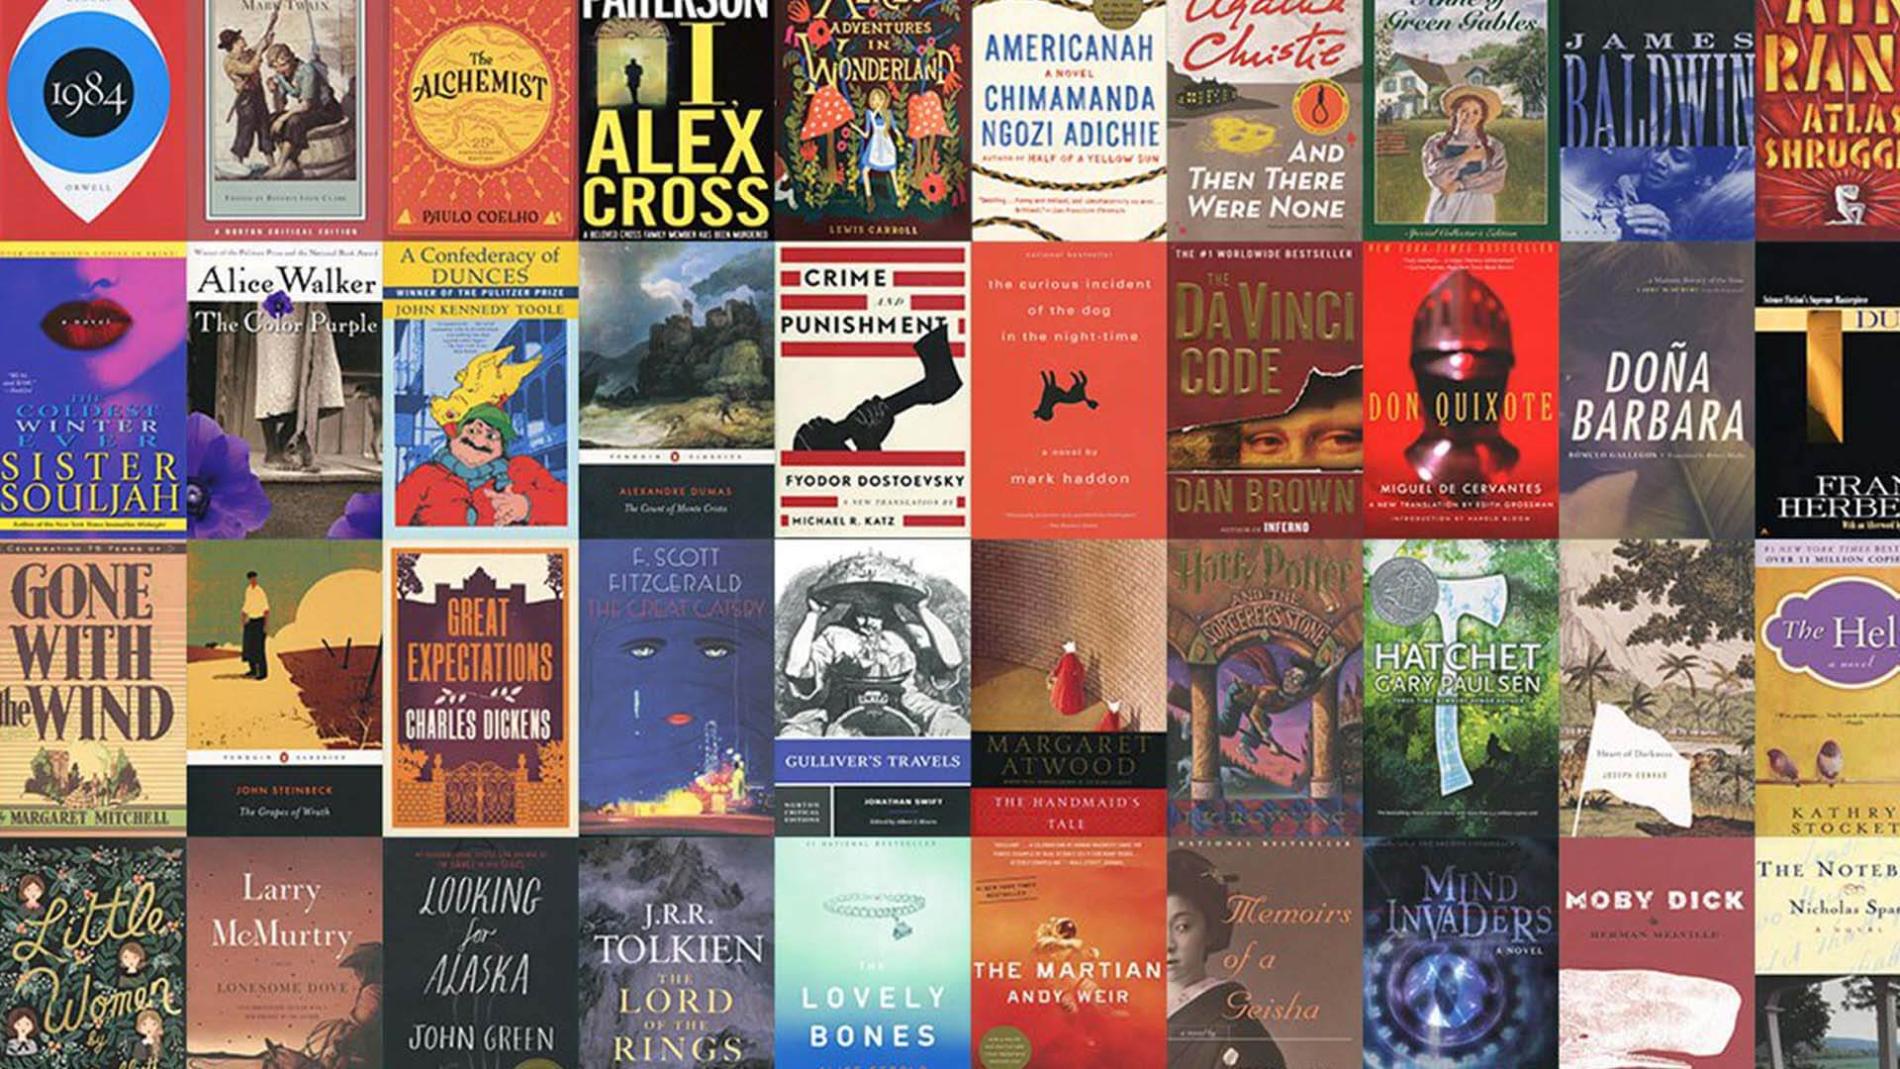 Collage of book covers from books featured in PBS' Great American Read 2018. 